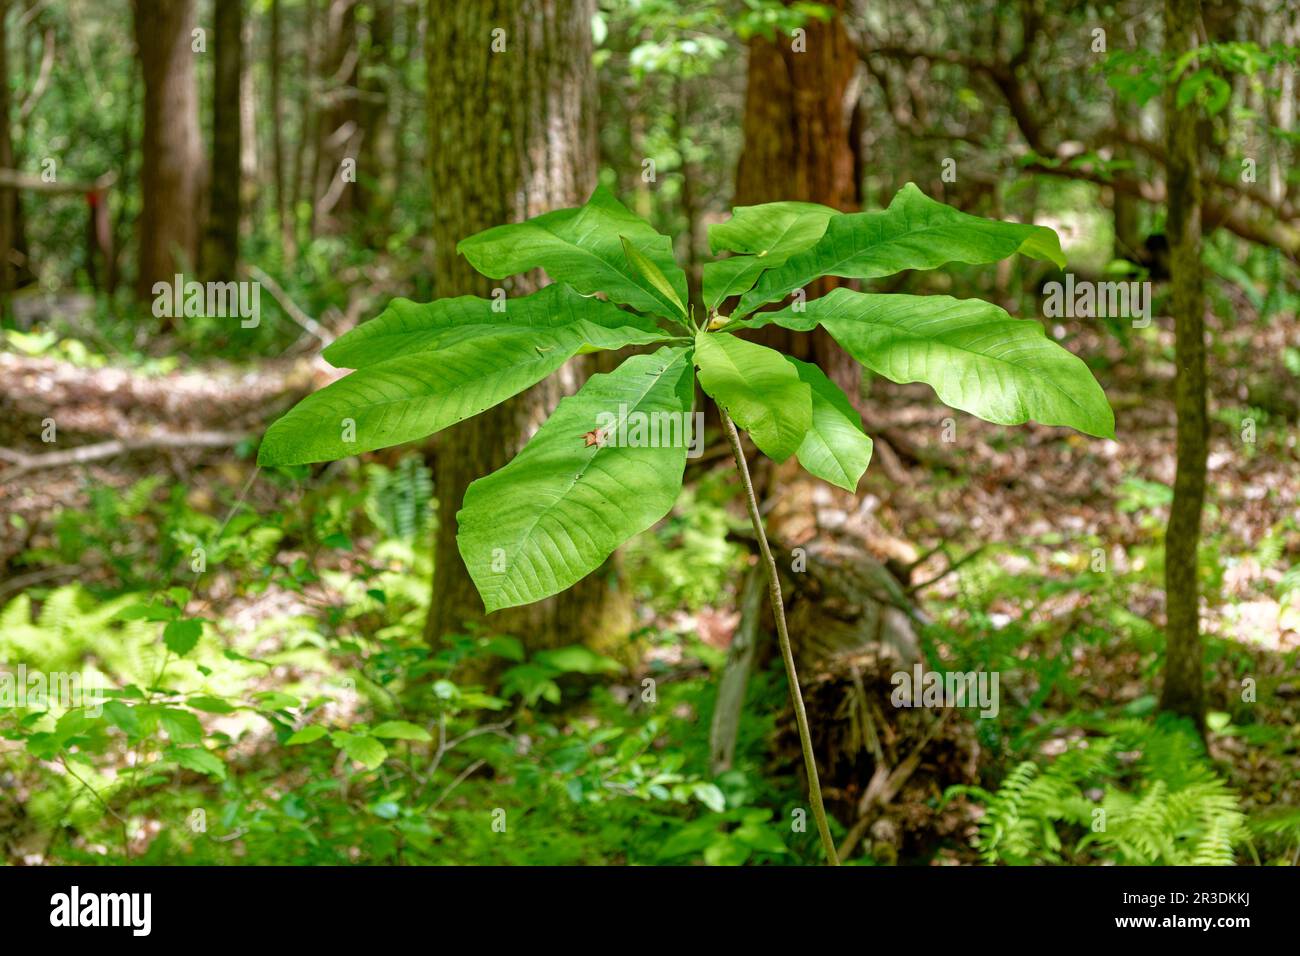 A new Bigleaf magnolia plant from seedling growing into a large tree that will have huge leaves growing wild in a forest in springtime Stock Photo